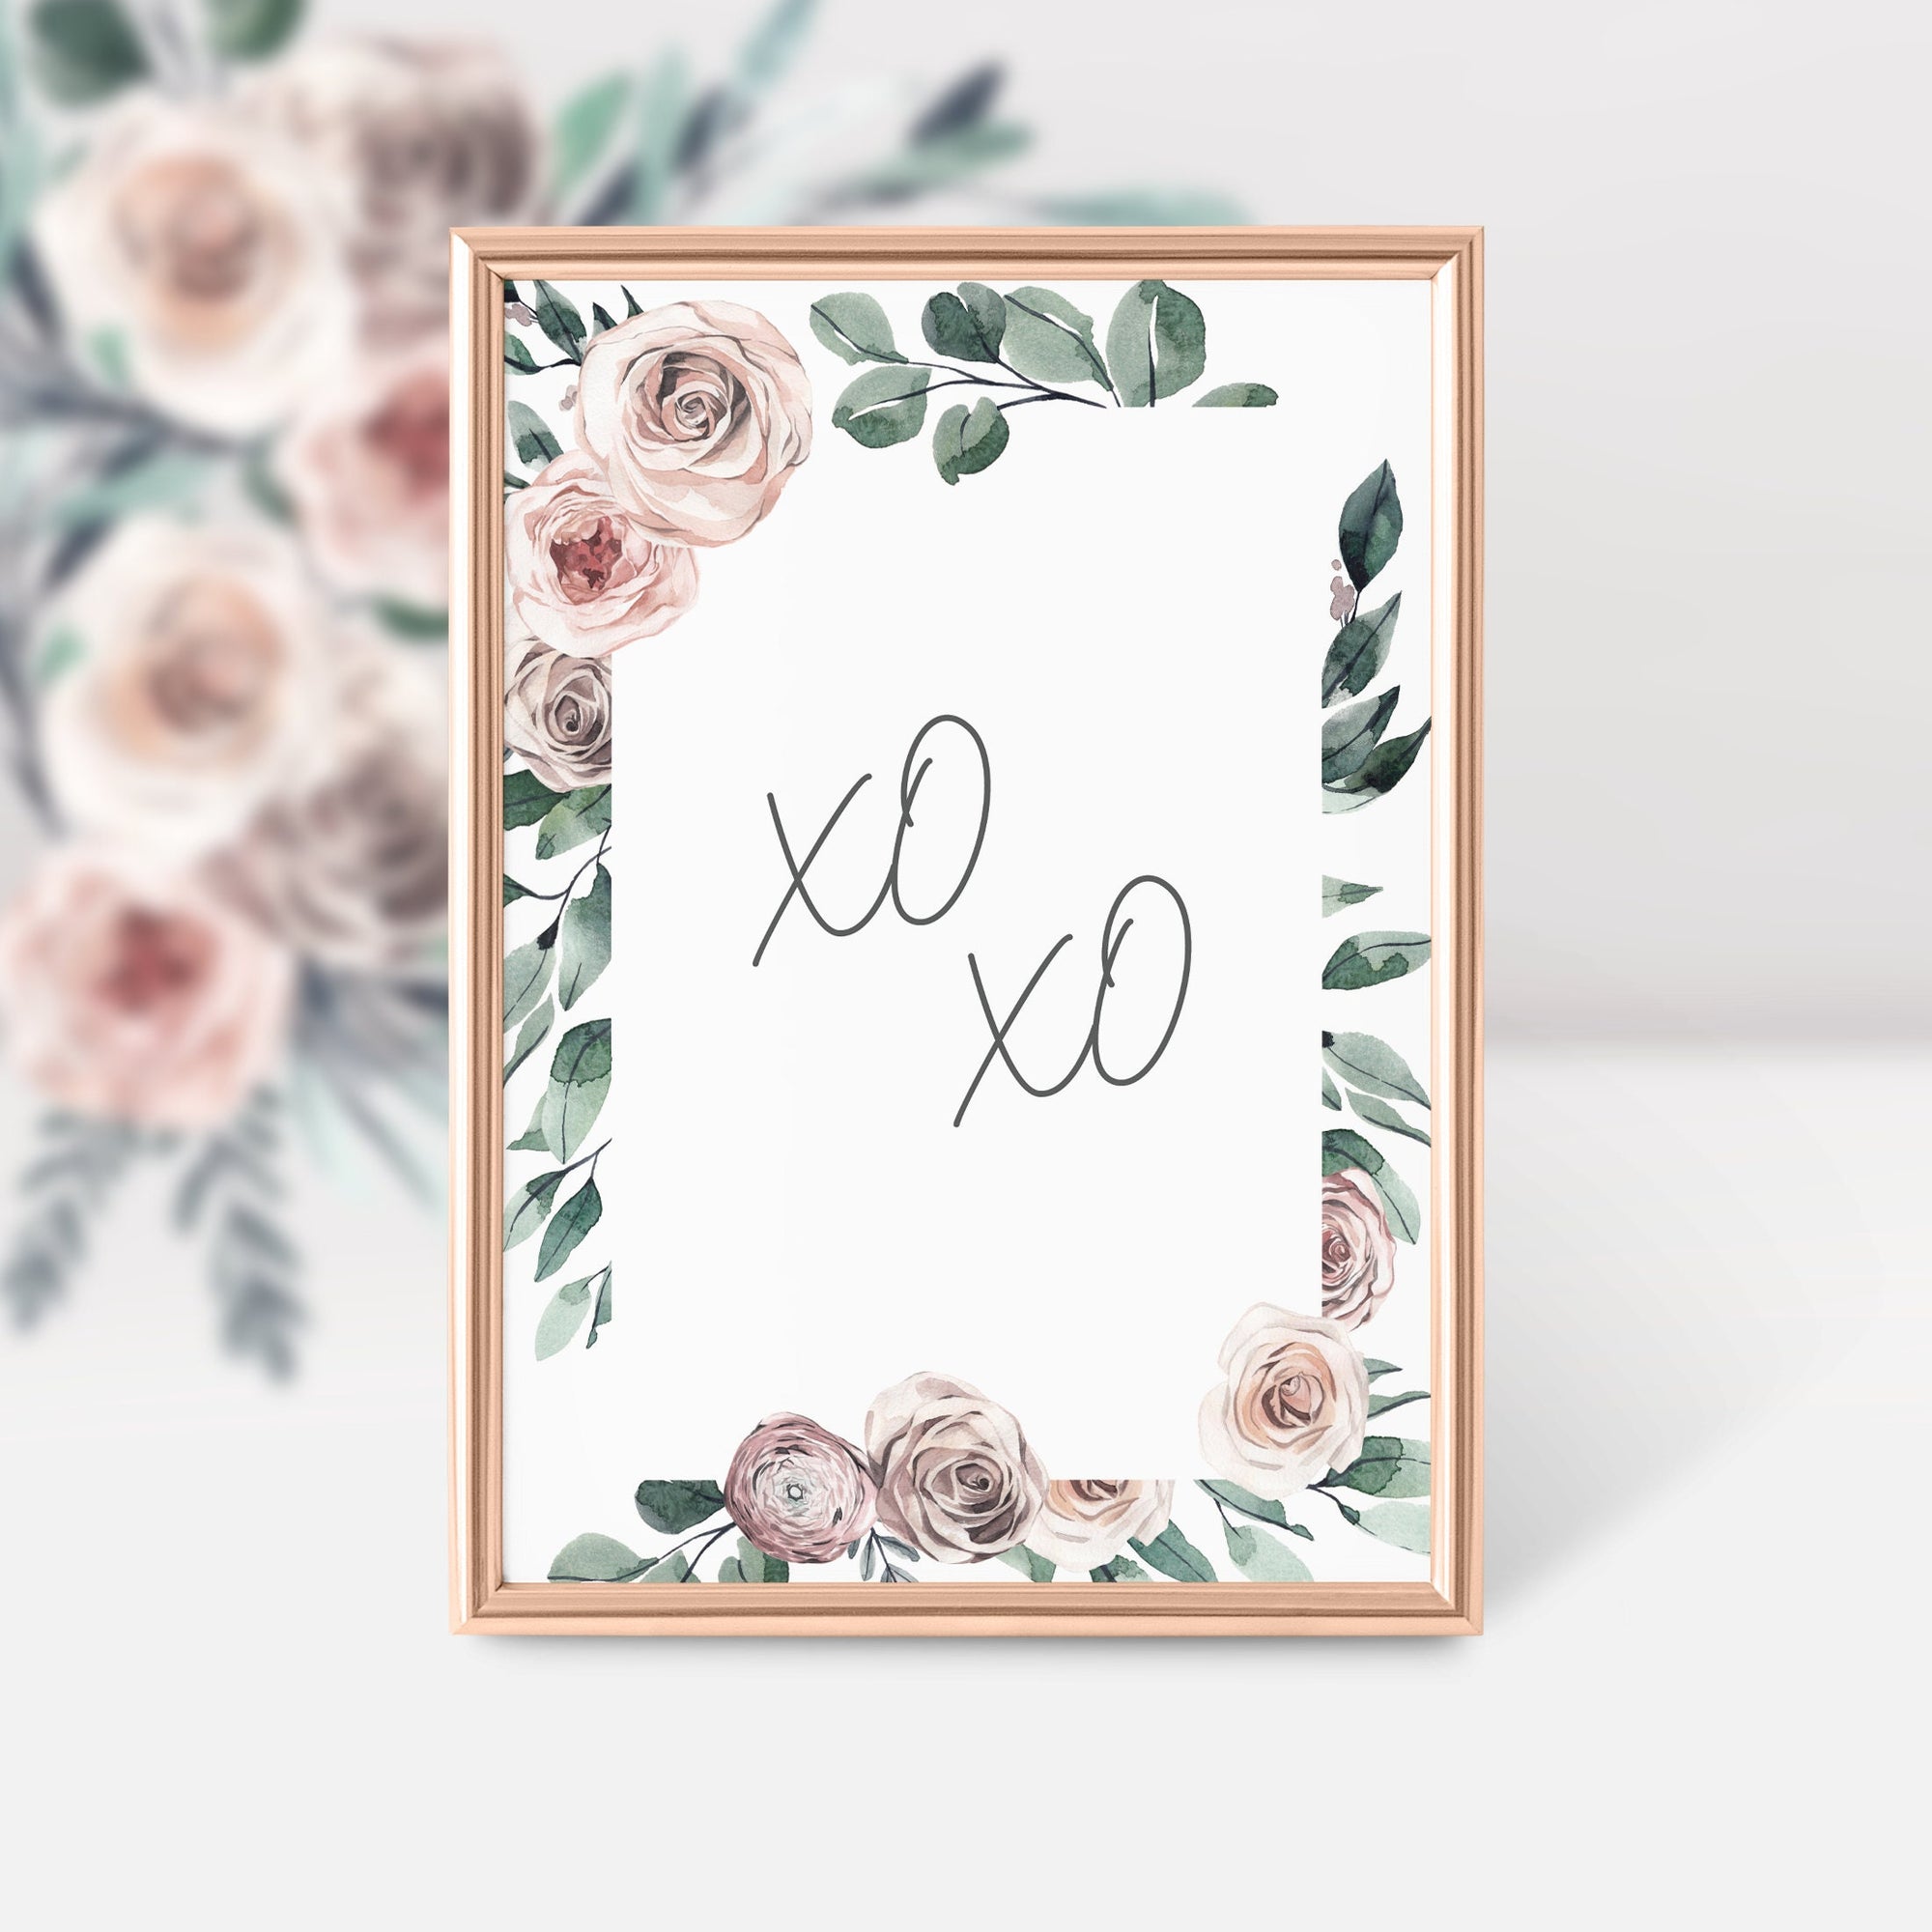 XOXO Sign Printable, Valentines Day Decor, Galentines Day Decor, Valentines Day Party Decorations, Galentines Party, INSTANT DOWNLOAD BR100